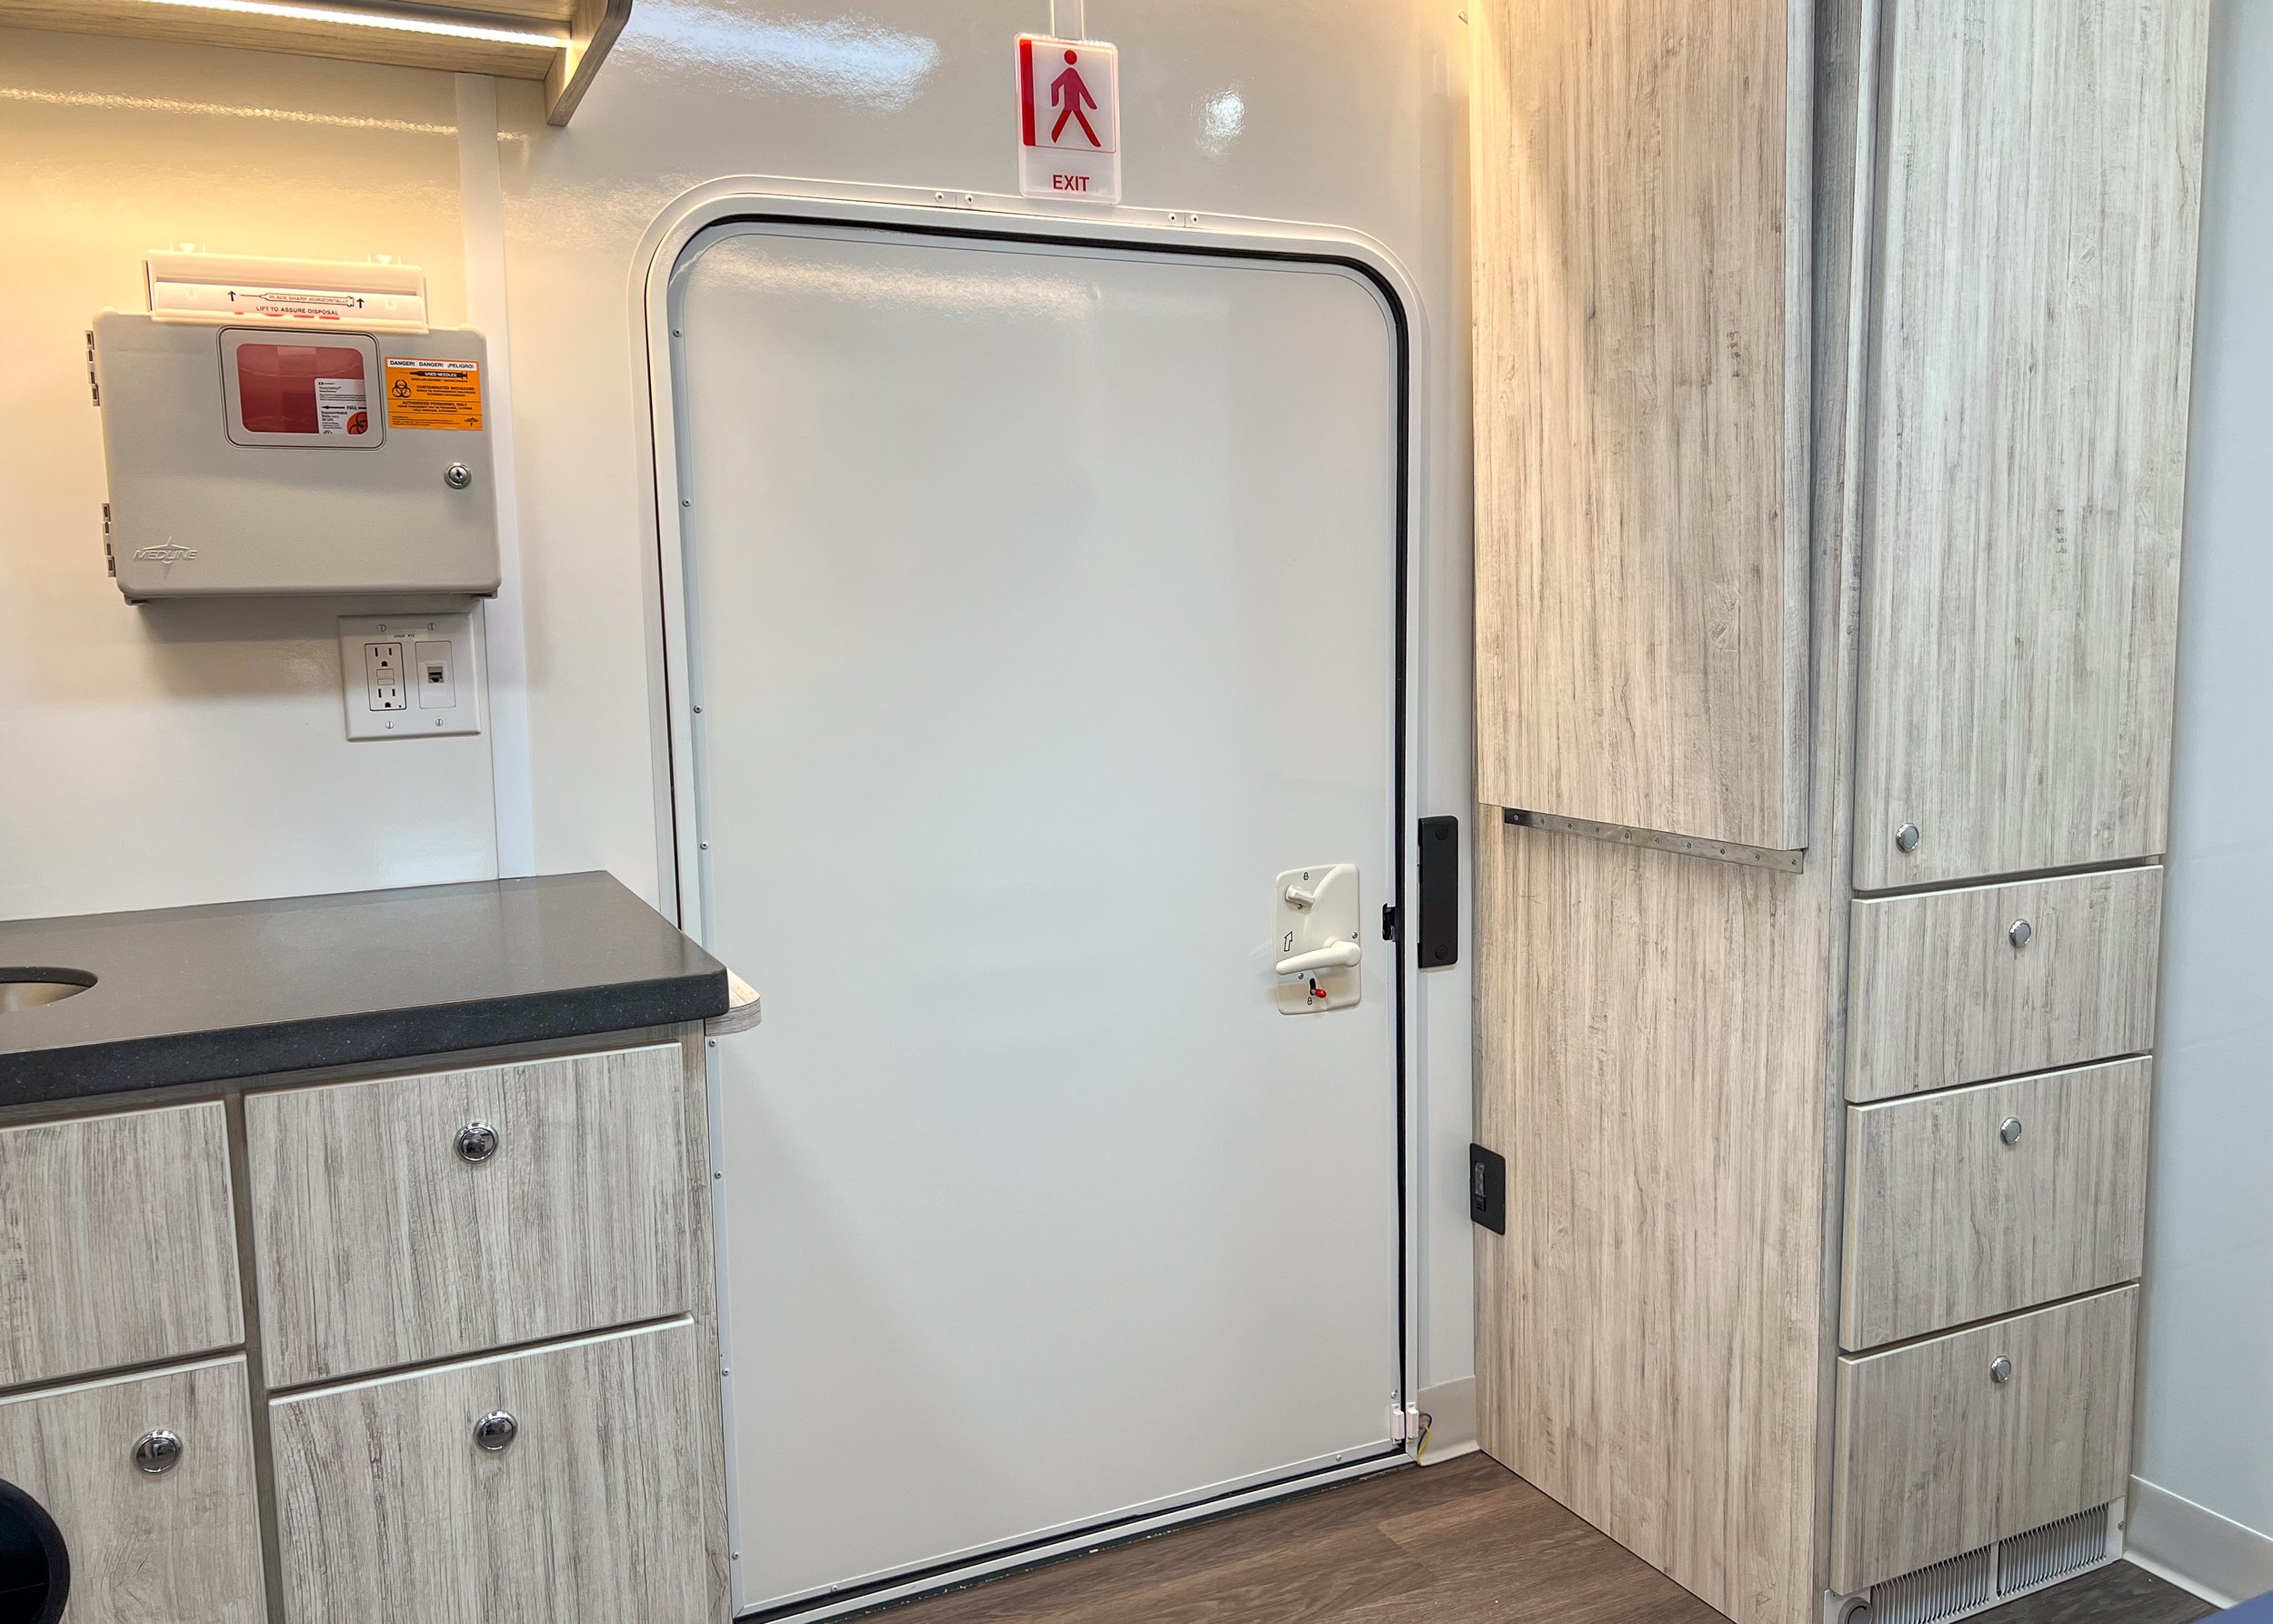  Handicap accessible door (with wheelchair lift on outside), sink area (left), storage (right), and work surface stowed. 